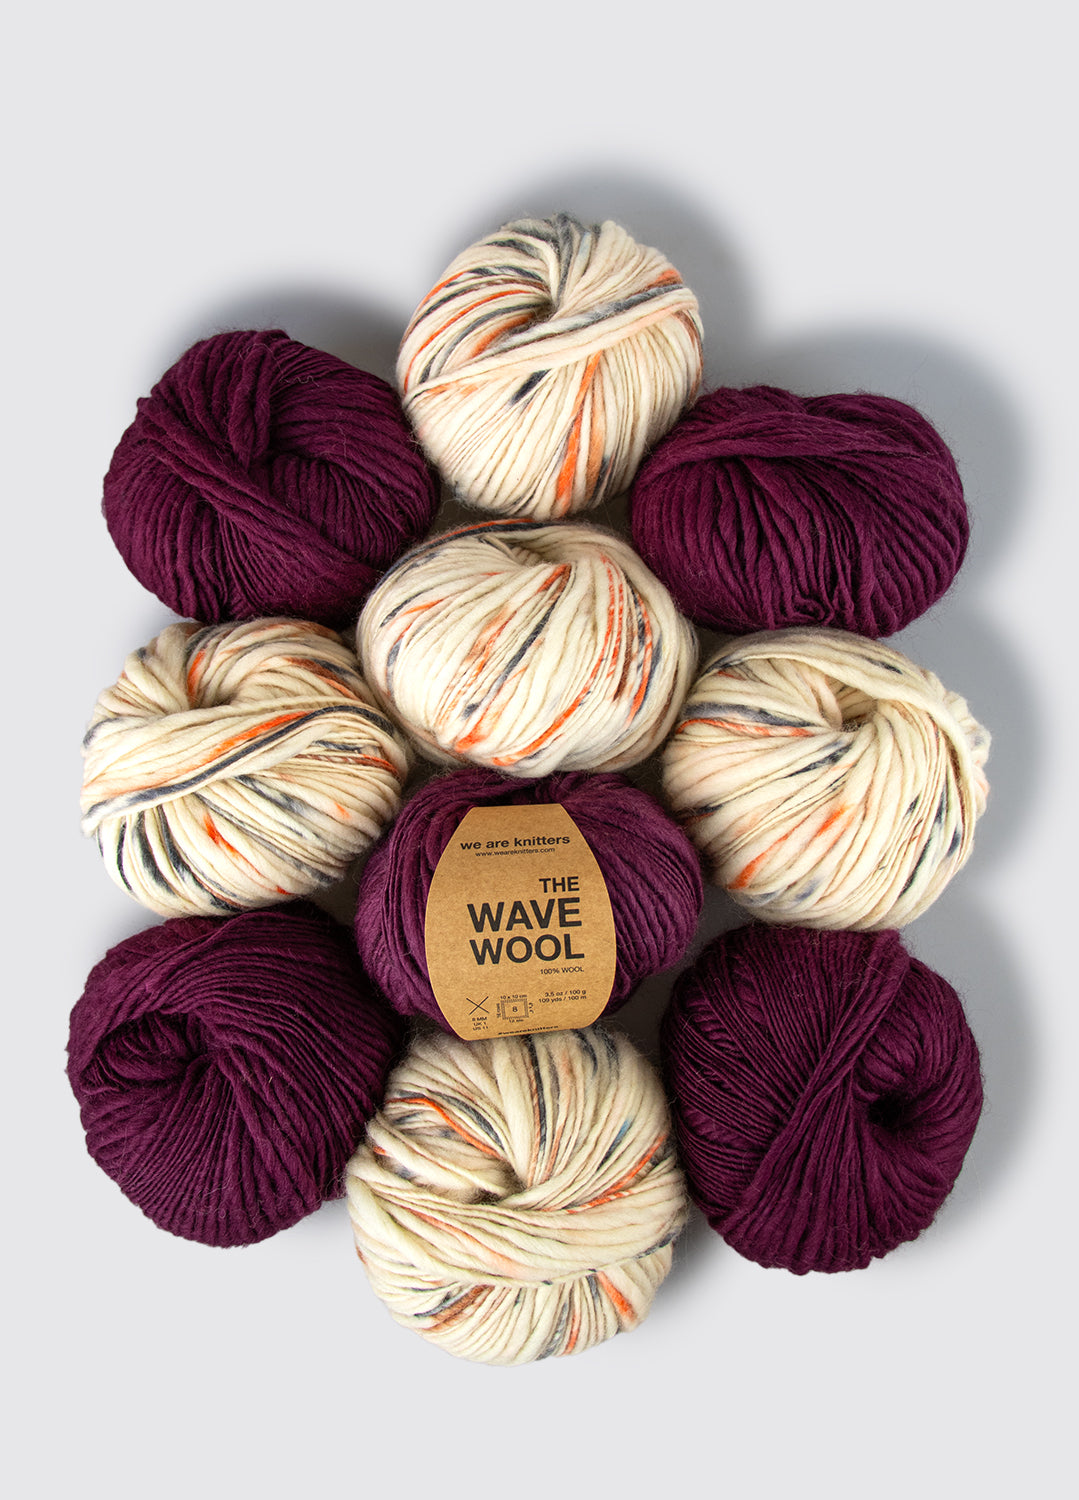 10 Pack of Wave Yarn Balls